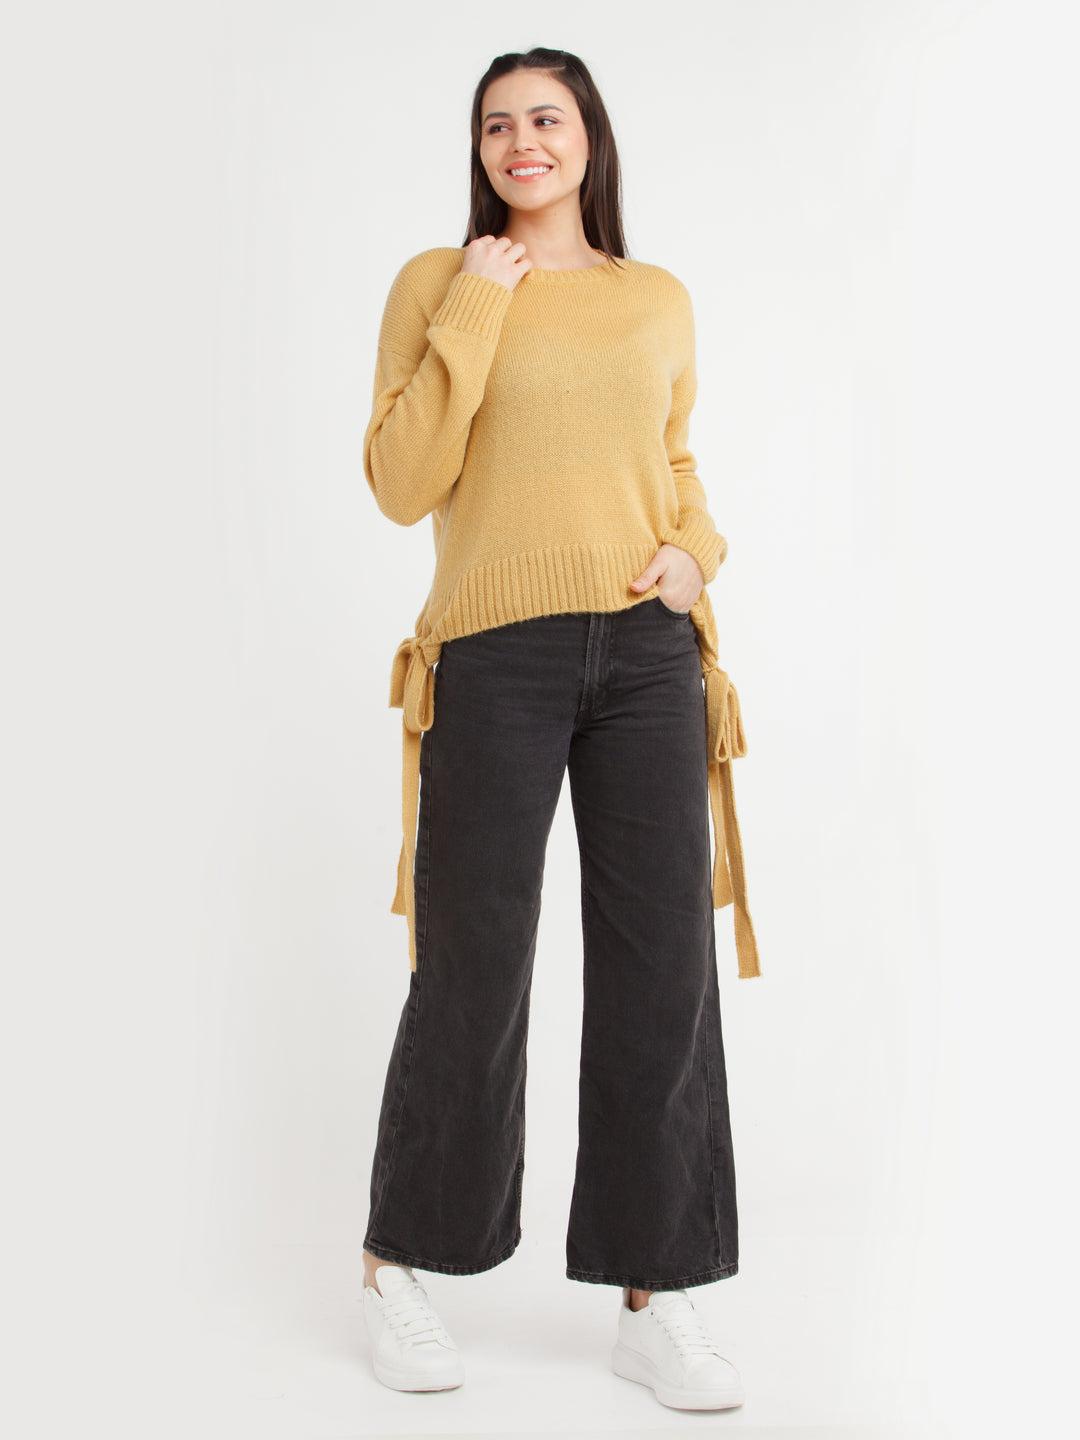 Mustard Solid Sweater For Women By Zink London